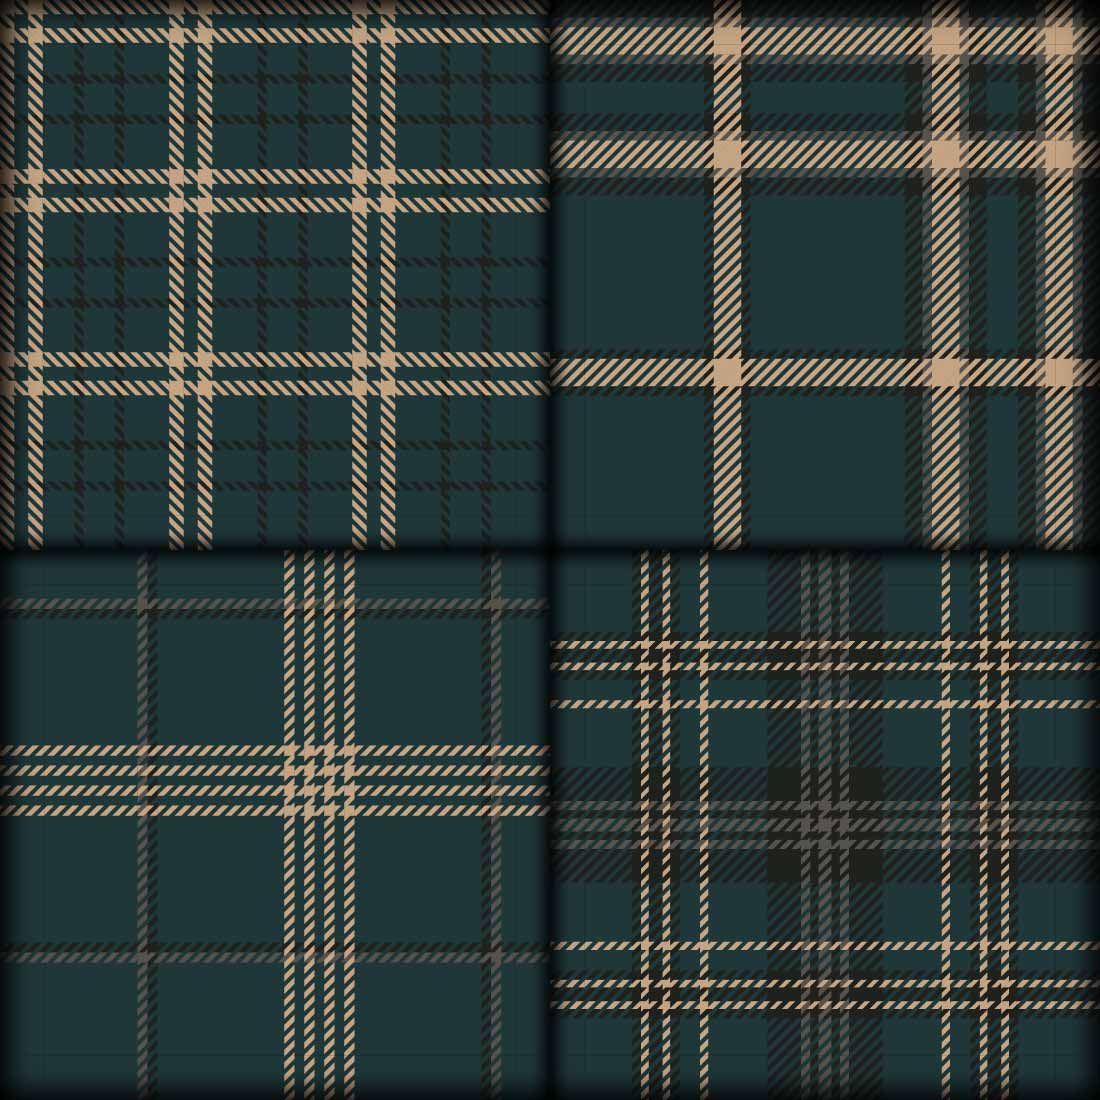 Tartan plaid pattern vector illustration set texture for clothing fabric prints only $8 preview image.